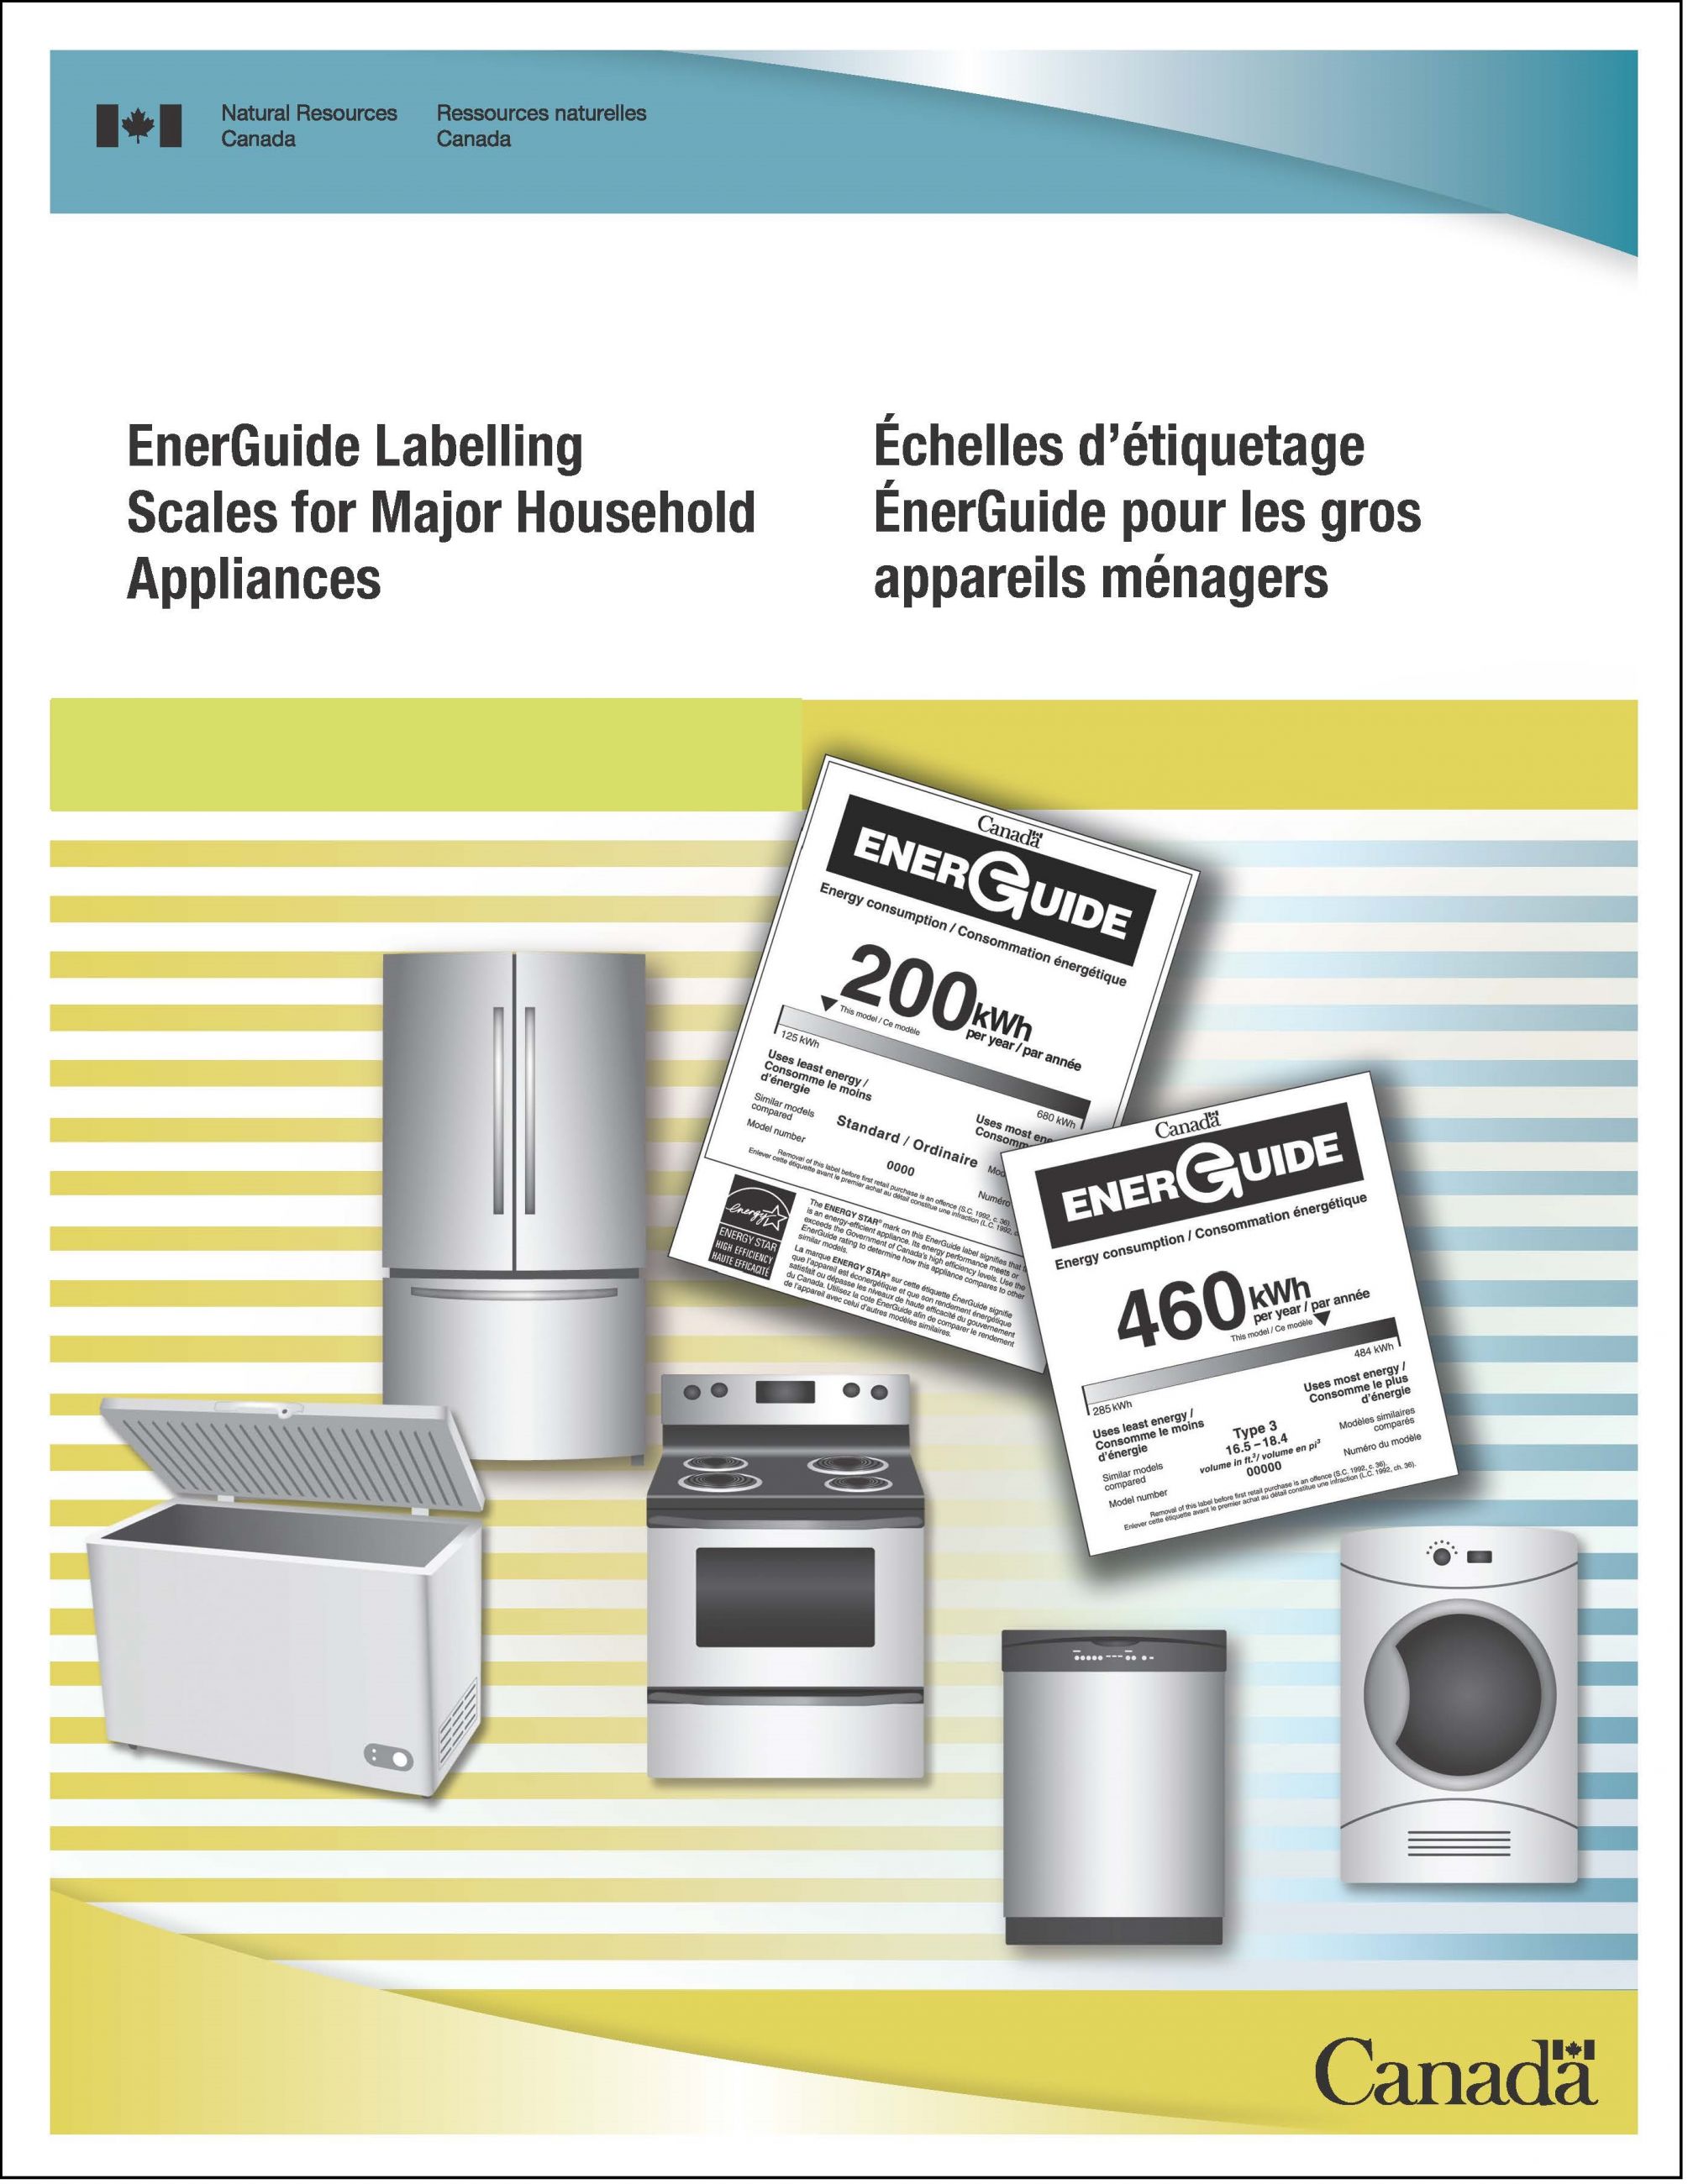 EnerGuide Labelling Scales for Major Household Appliances